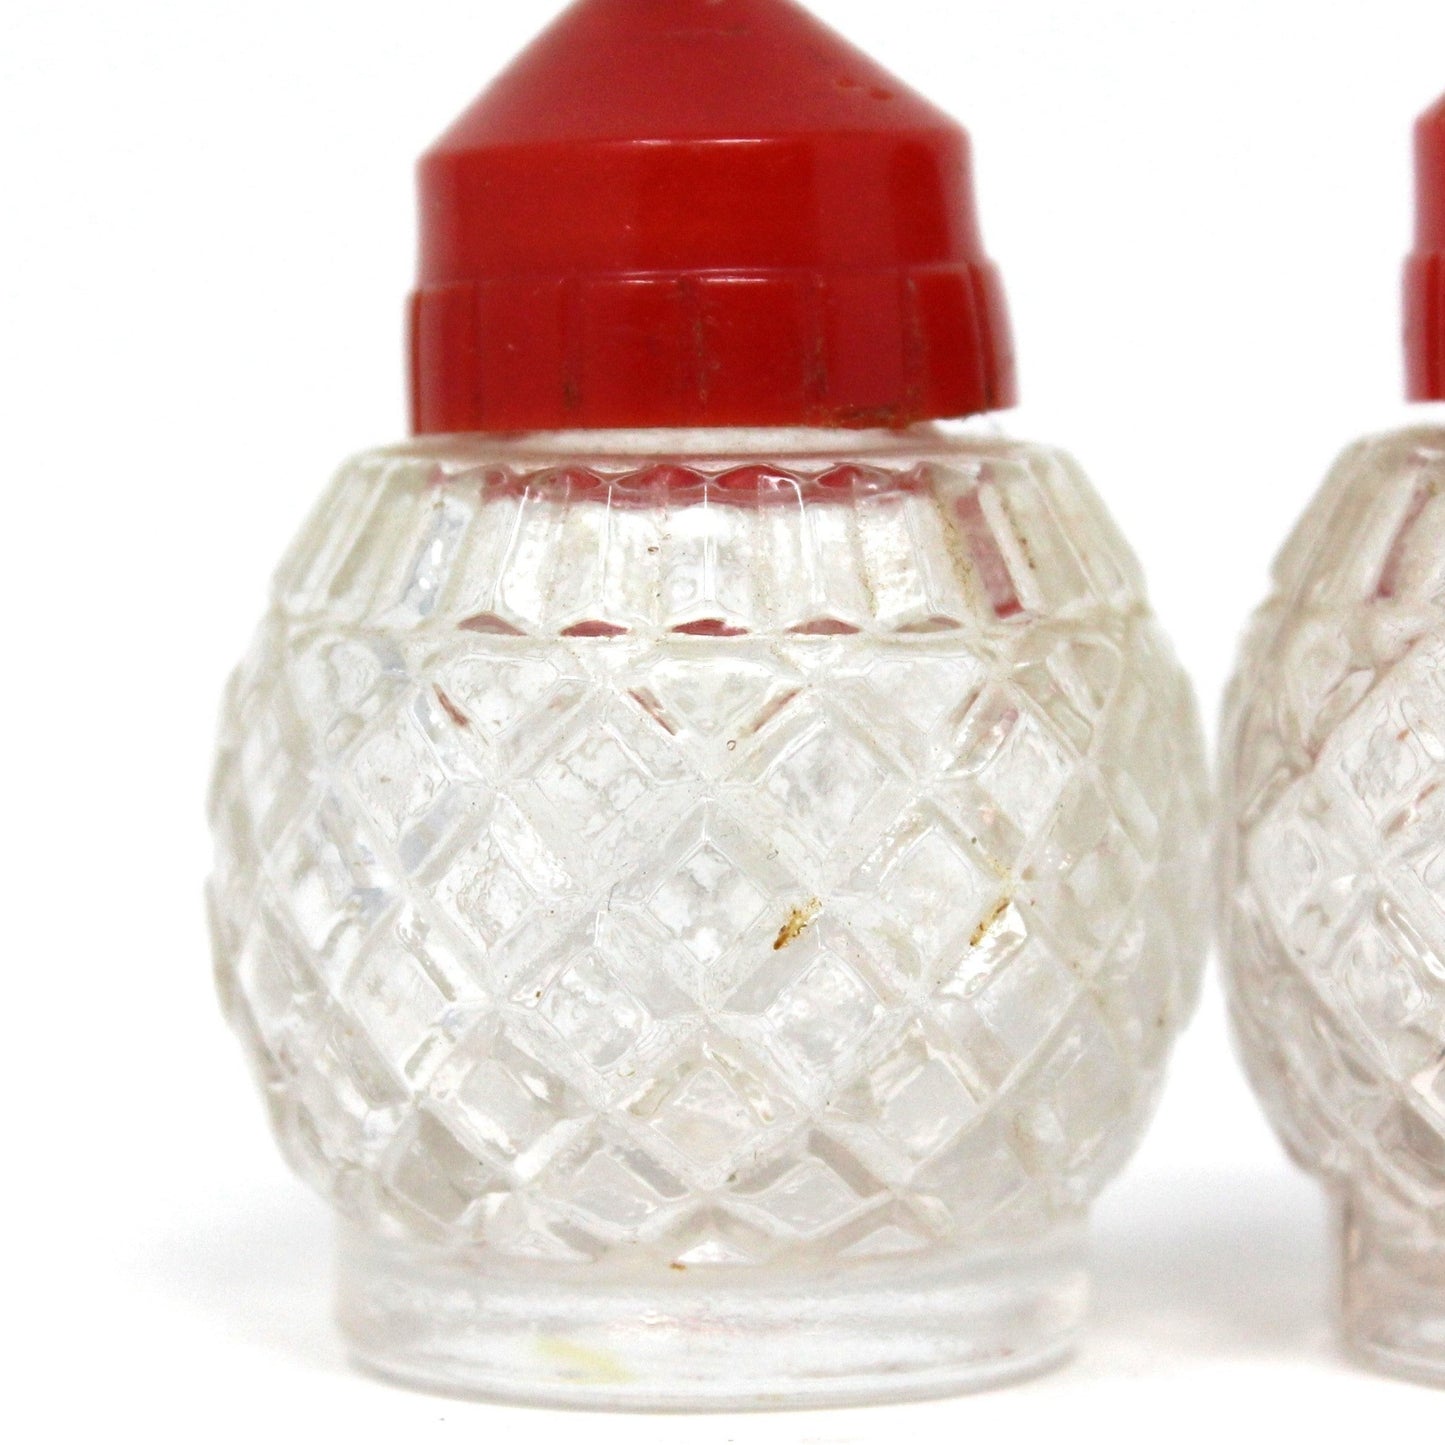 Salt and Pepper Shakers, Pressed Glass with Red Bakelite Tops, Vintage